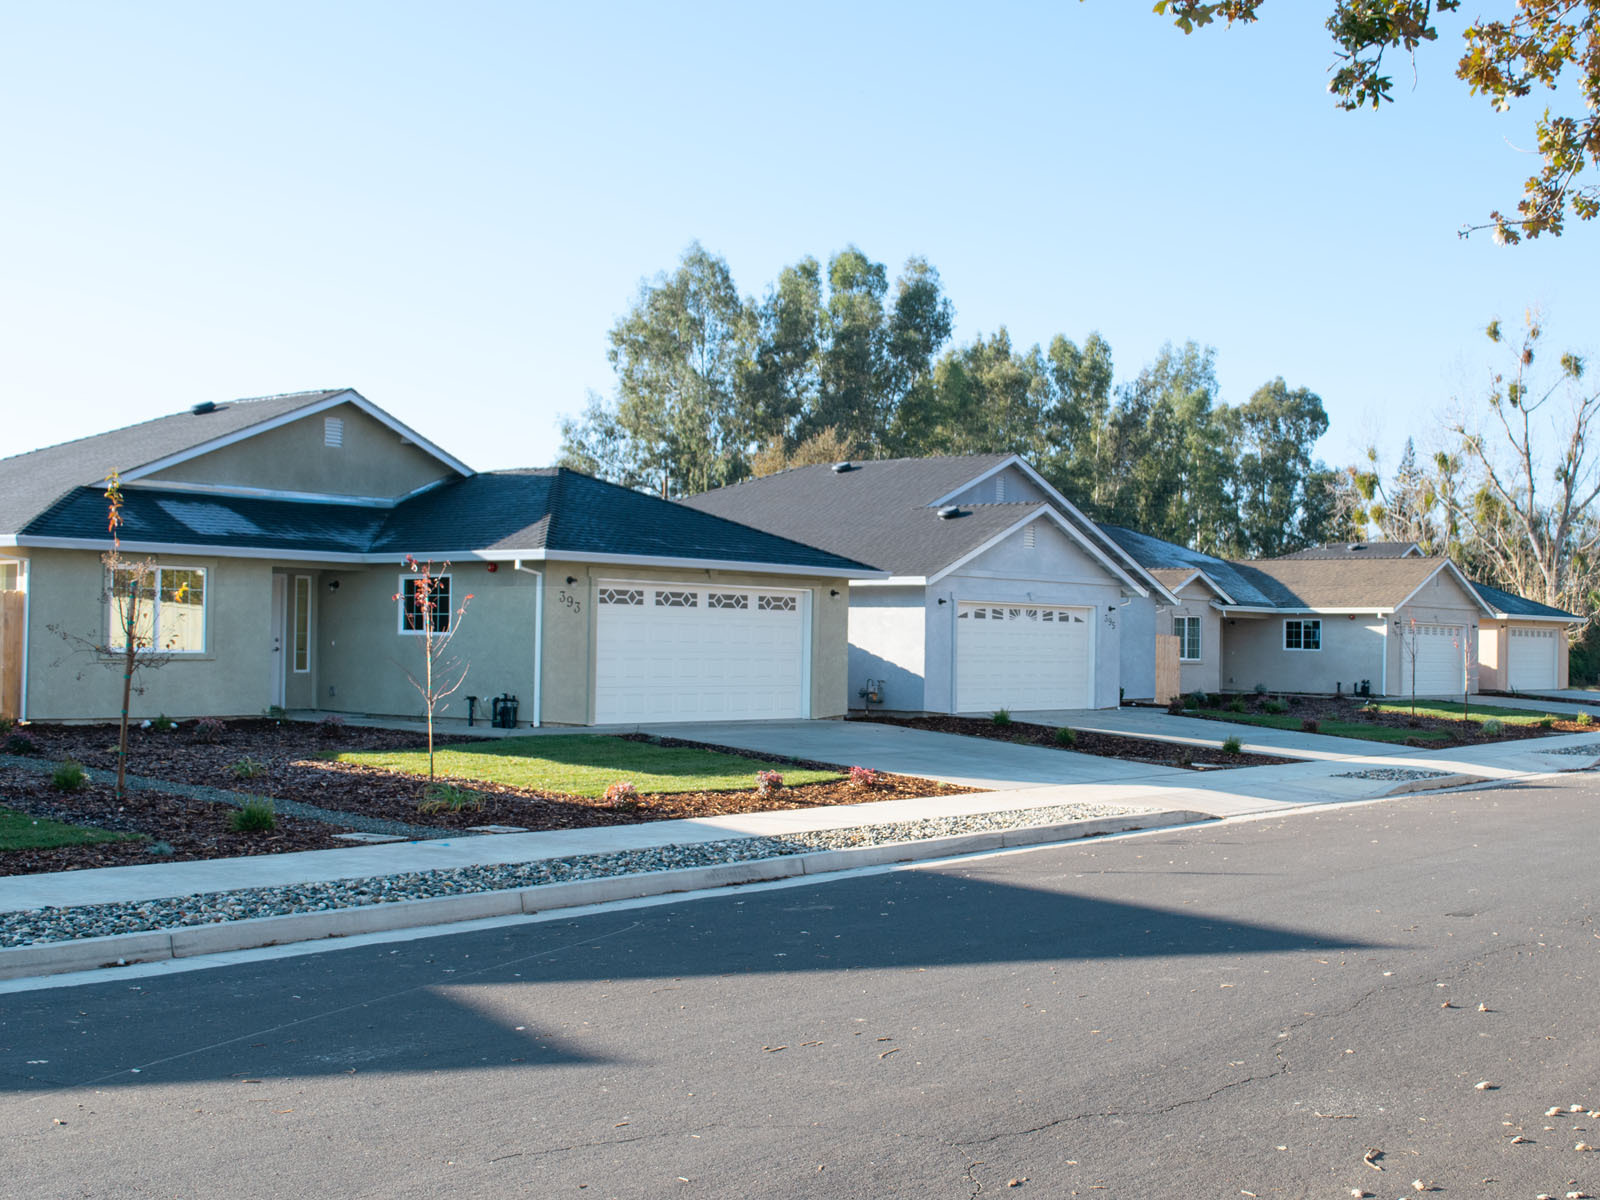 A row of homes in Biggs, CA span the photo. In the foreground is the street and the sidewalk in front of the homes. In the background are a few trees and a light blue sky.